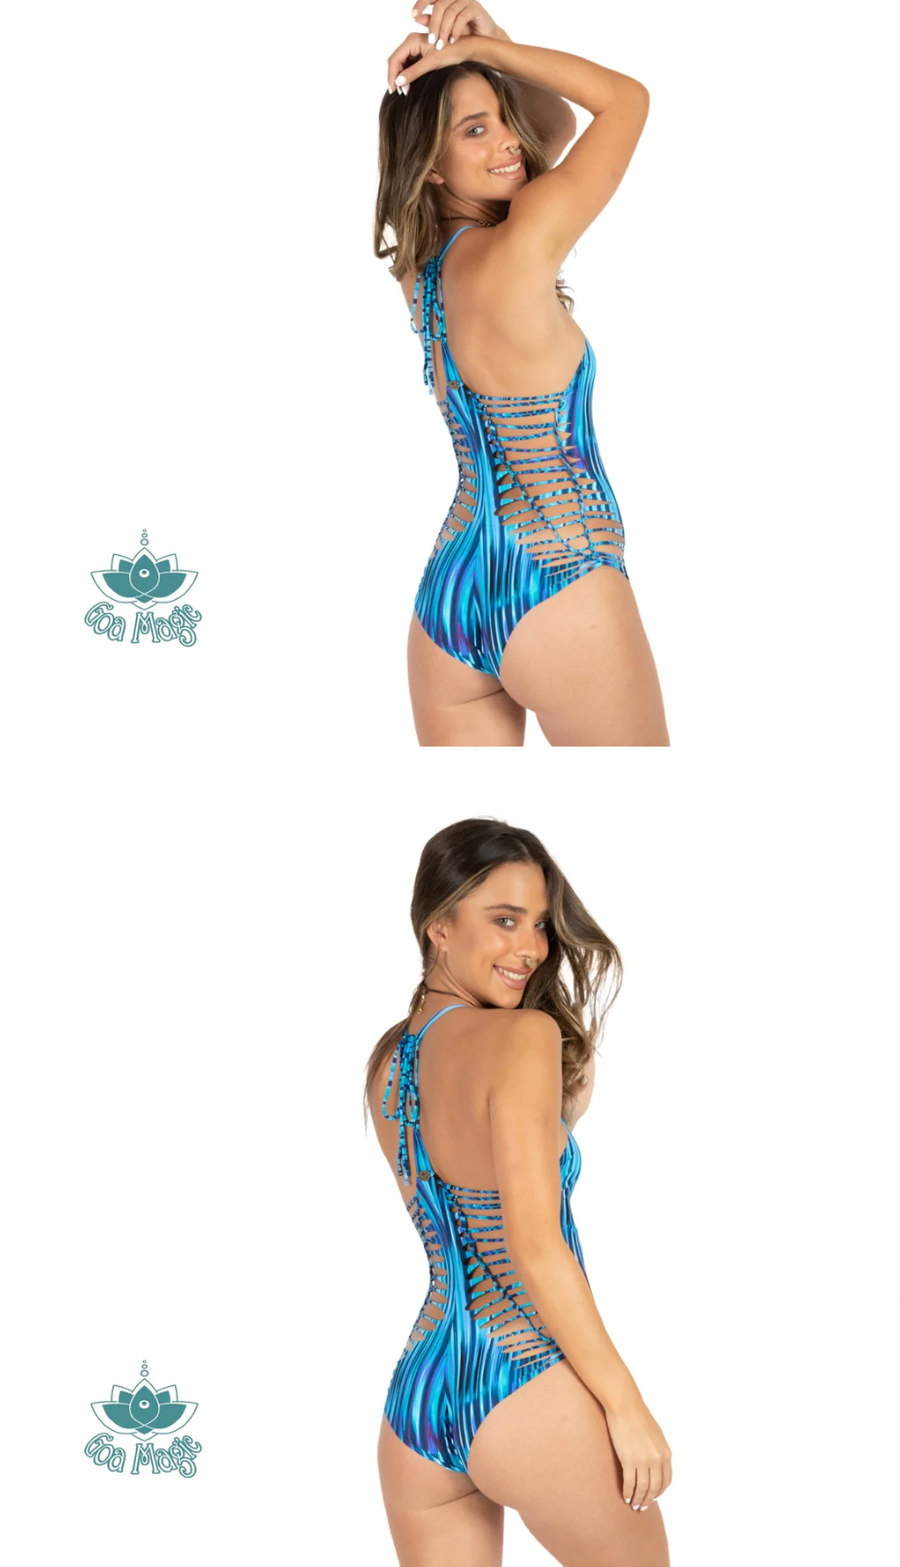 Printed Turquoise One Piece Swimsuit For Women "DORIN" (Lycra Fabric)